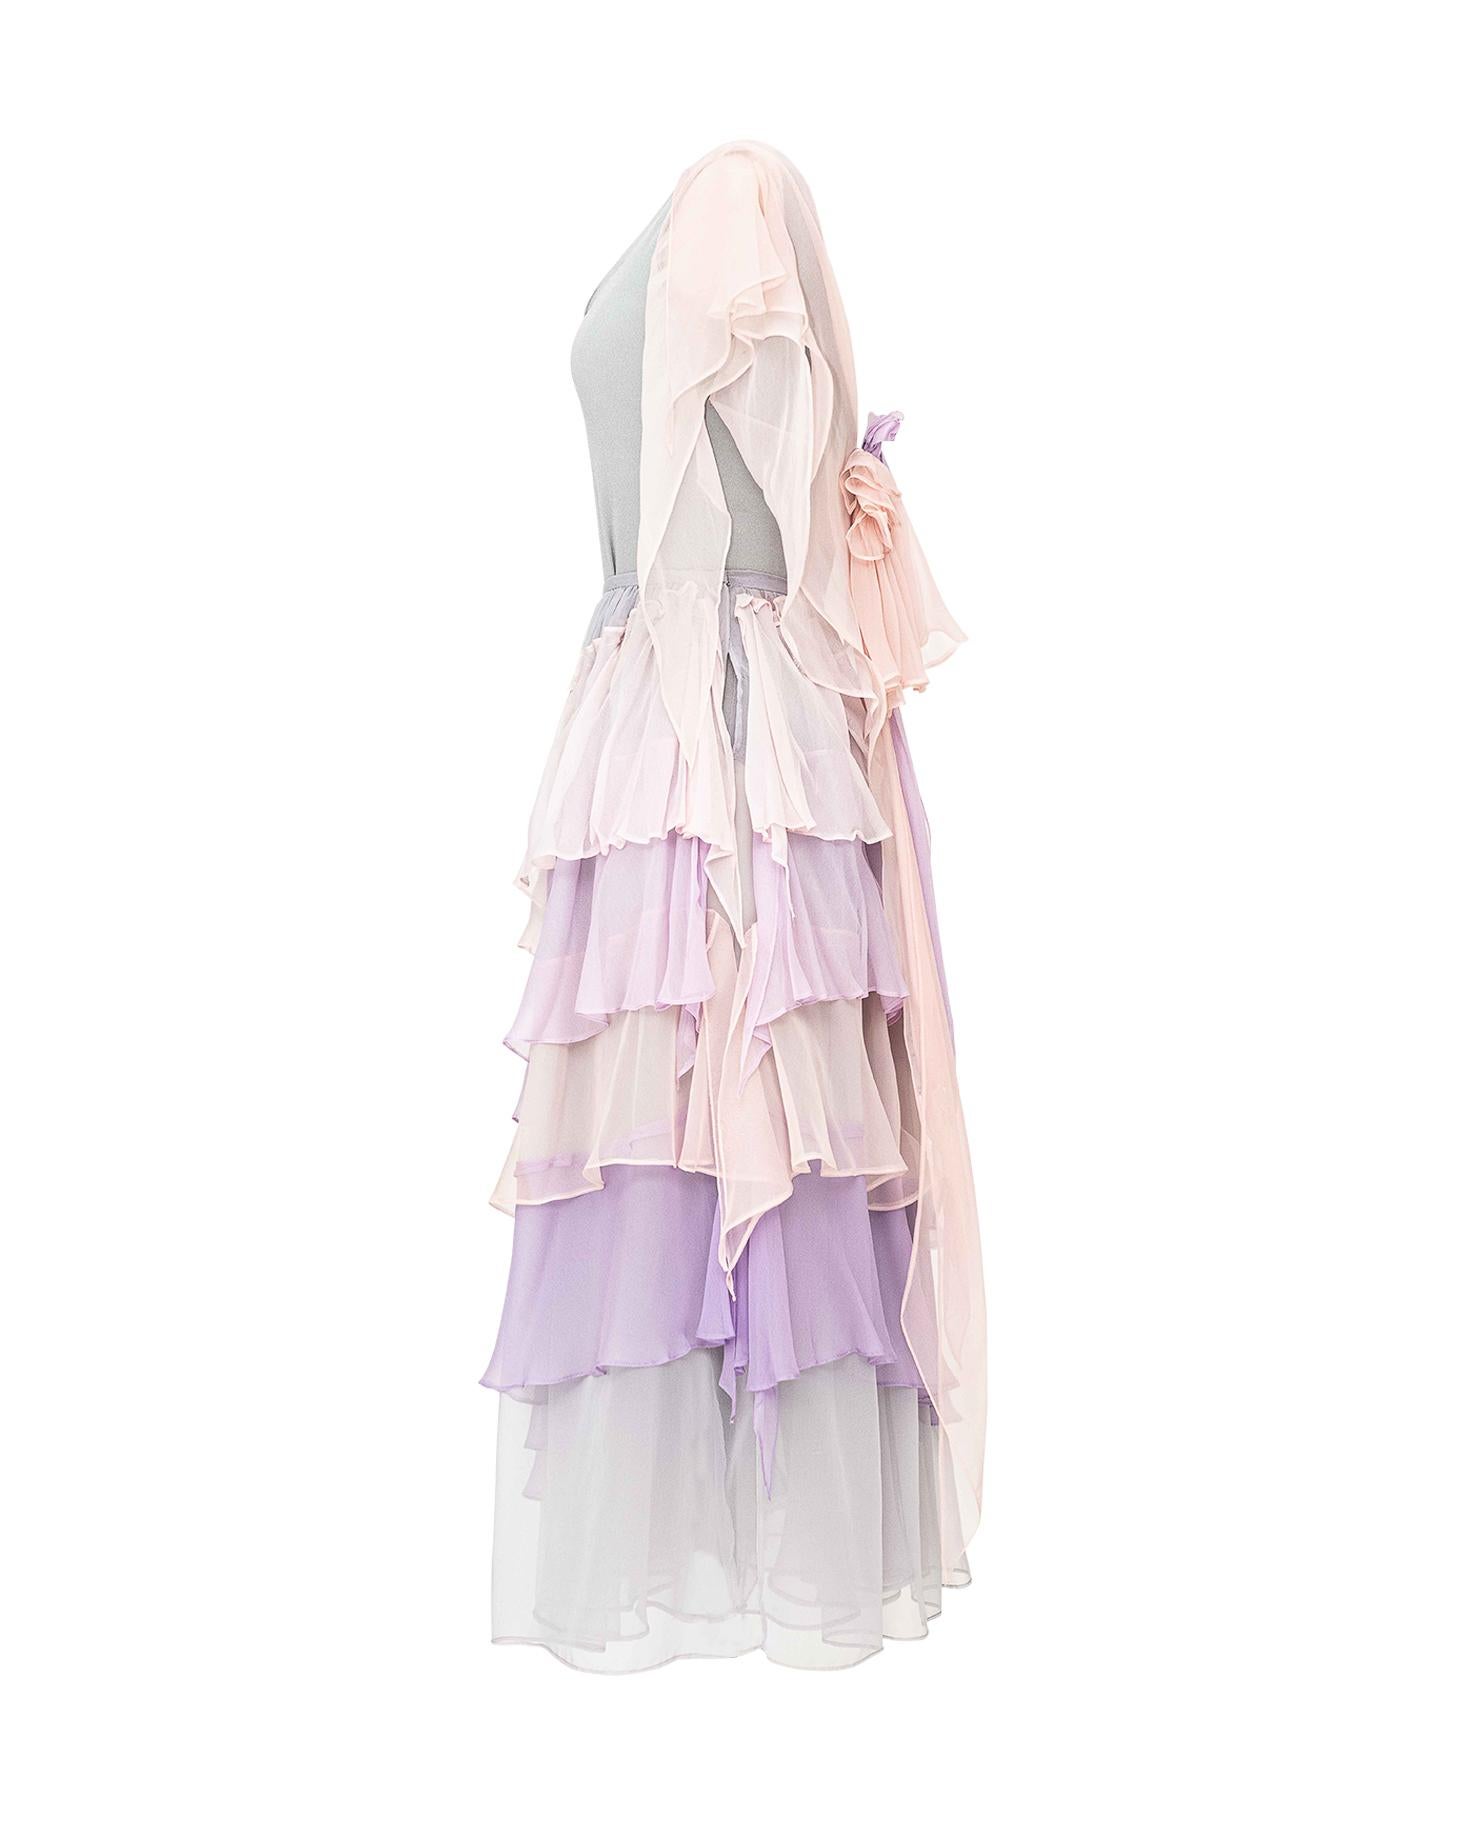 c. 1974 Giorgio Di Sant’Angelo “Romantic Chiffon Collection” slate grey bodysuit and tiered pastel silk chiffon skirt. Bodysuit is elastic with moderate stretch. Skirt is pink, purple and grey ruffle tiered design with great movement. Similar